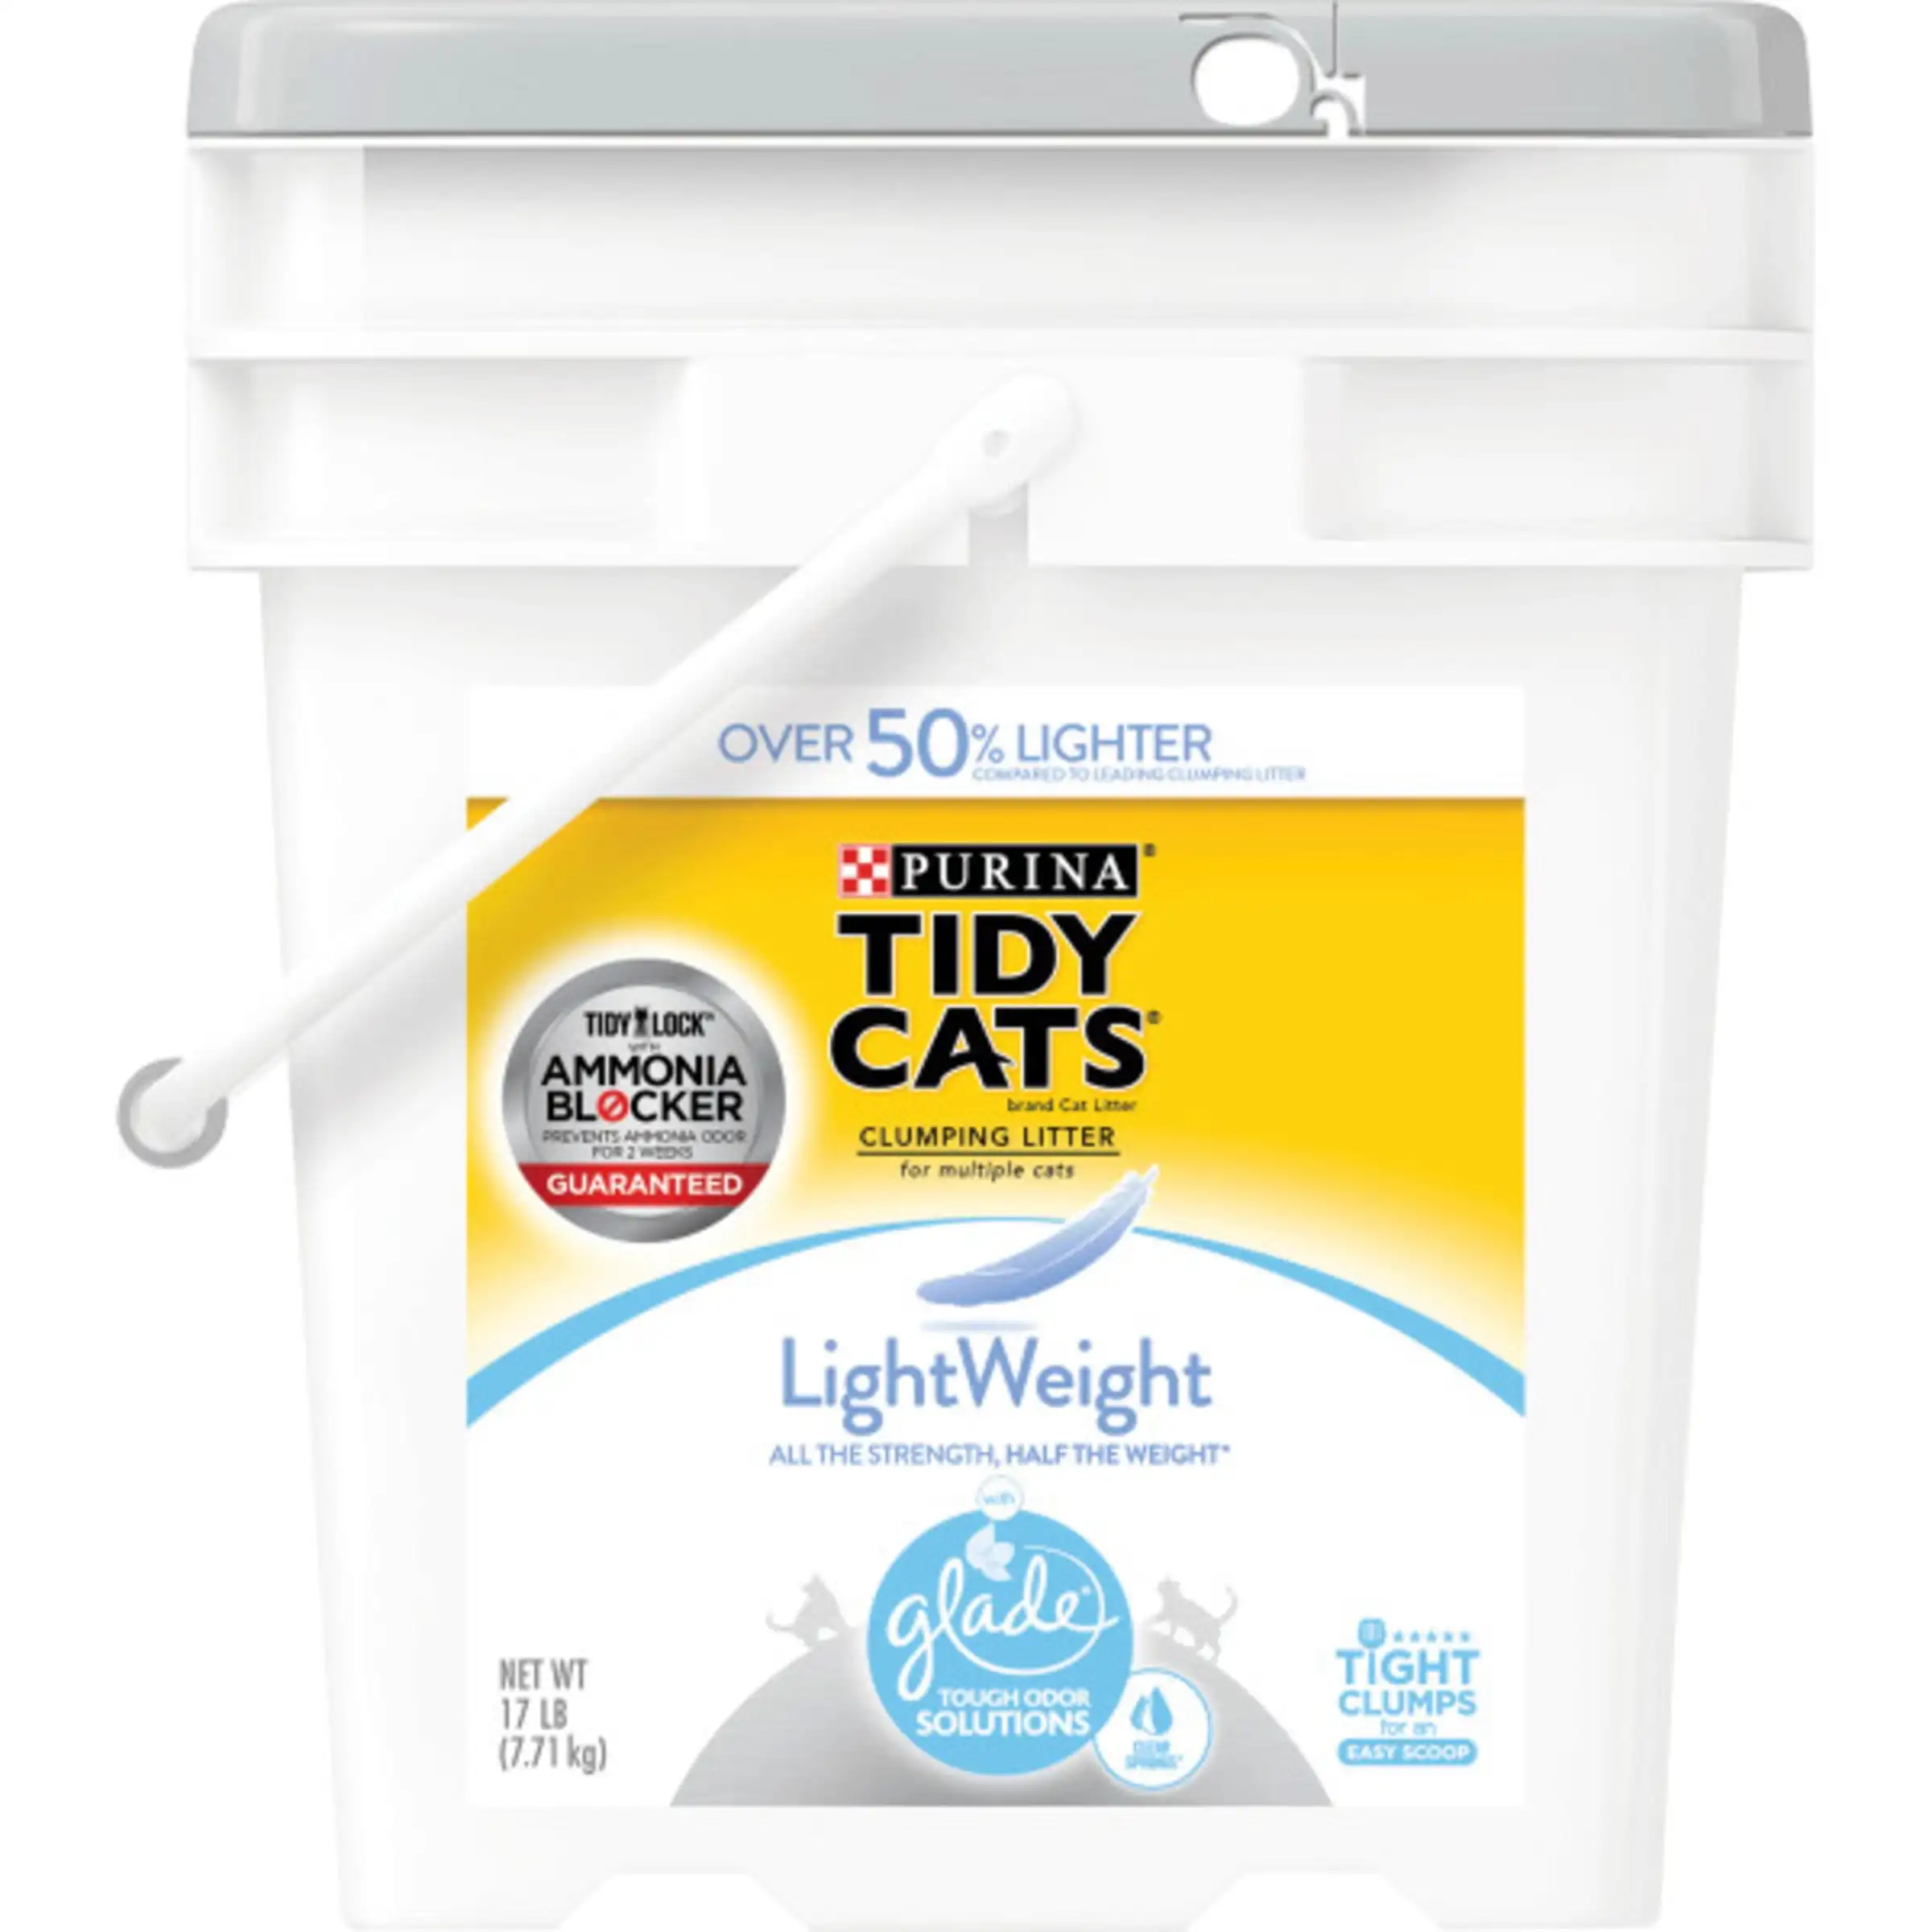 

Purina Tidy Cats Light Weight, Low Dust, Clumping, LightWeight Glade Clear Springs Multi Cat Litter, 17 lb. Pail